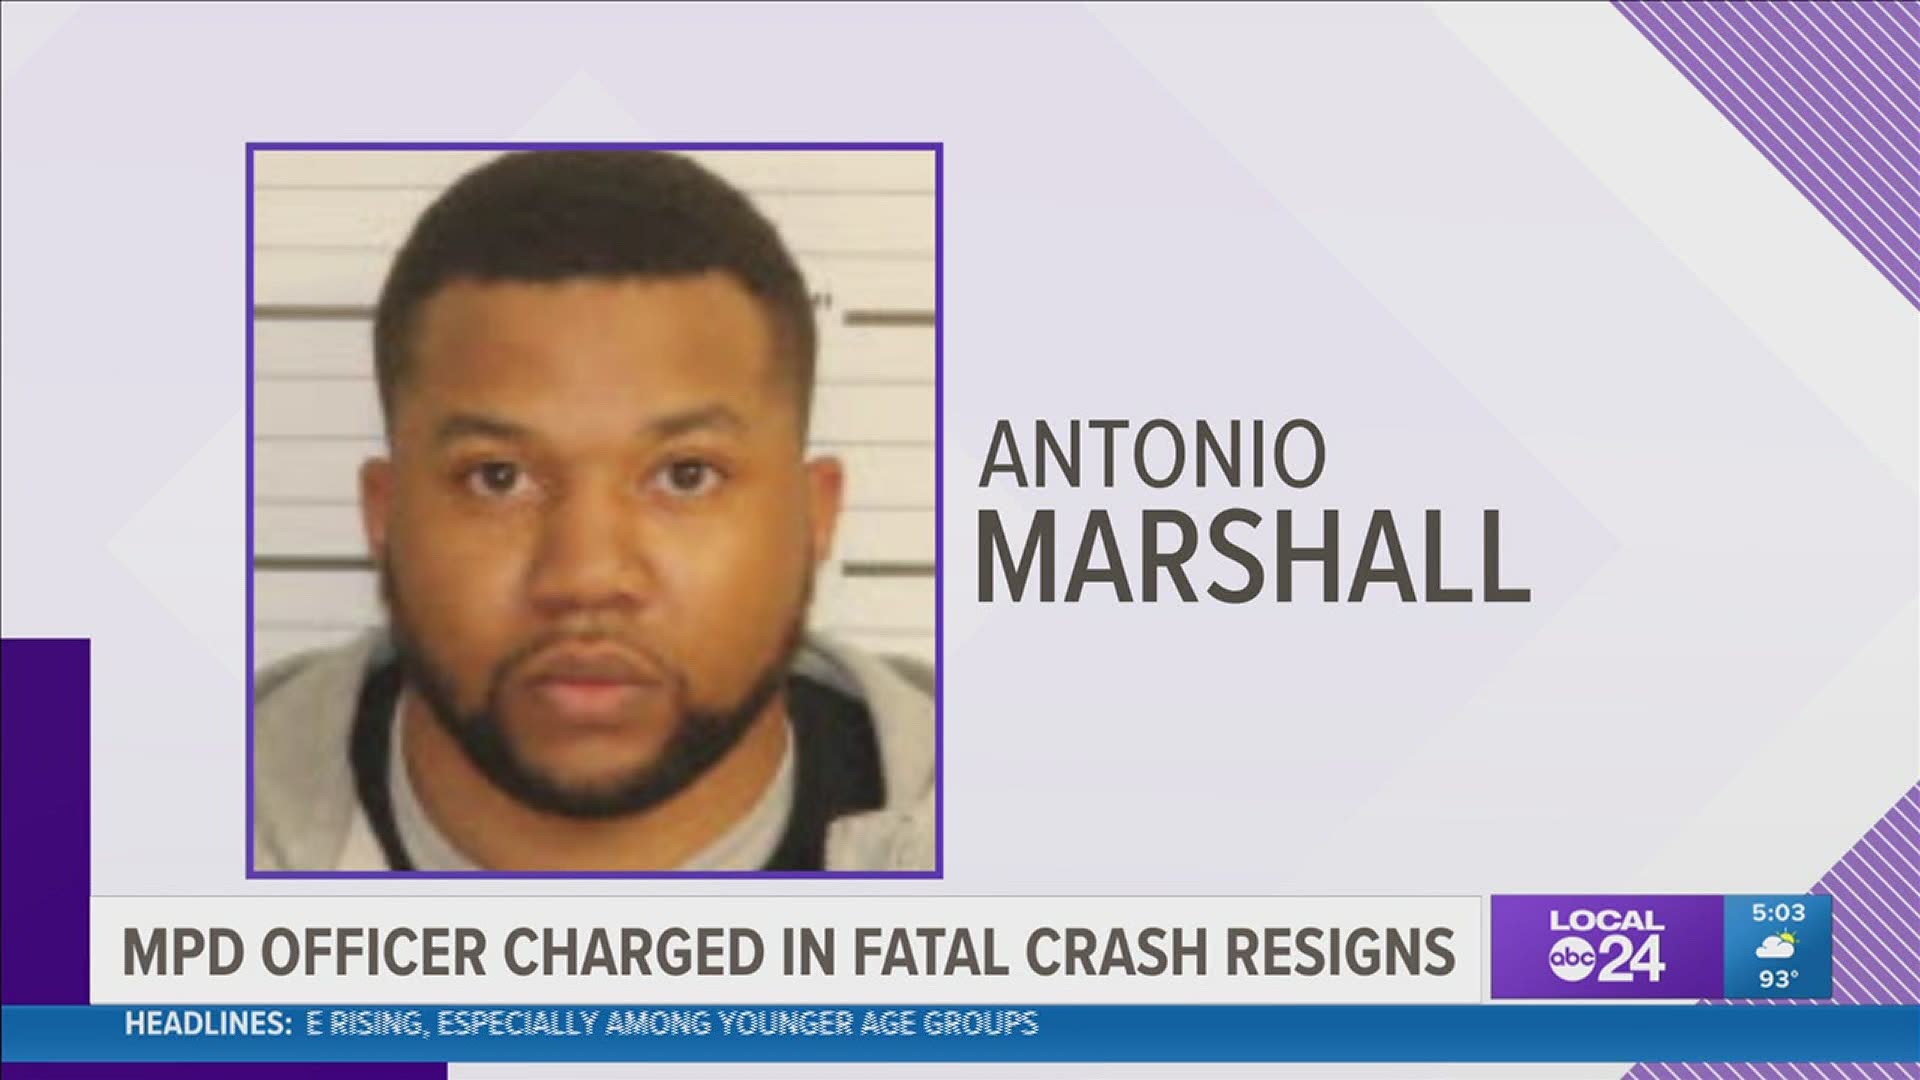 Antonio Marshall was reportedly speeding when he ran into a car in Cordova in June, killing two people.